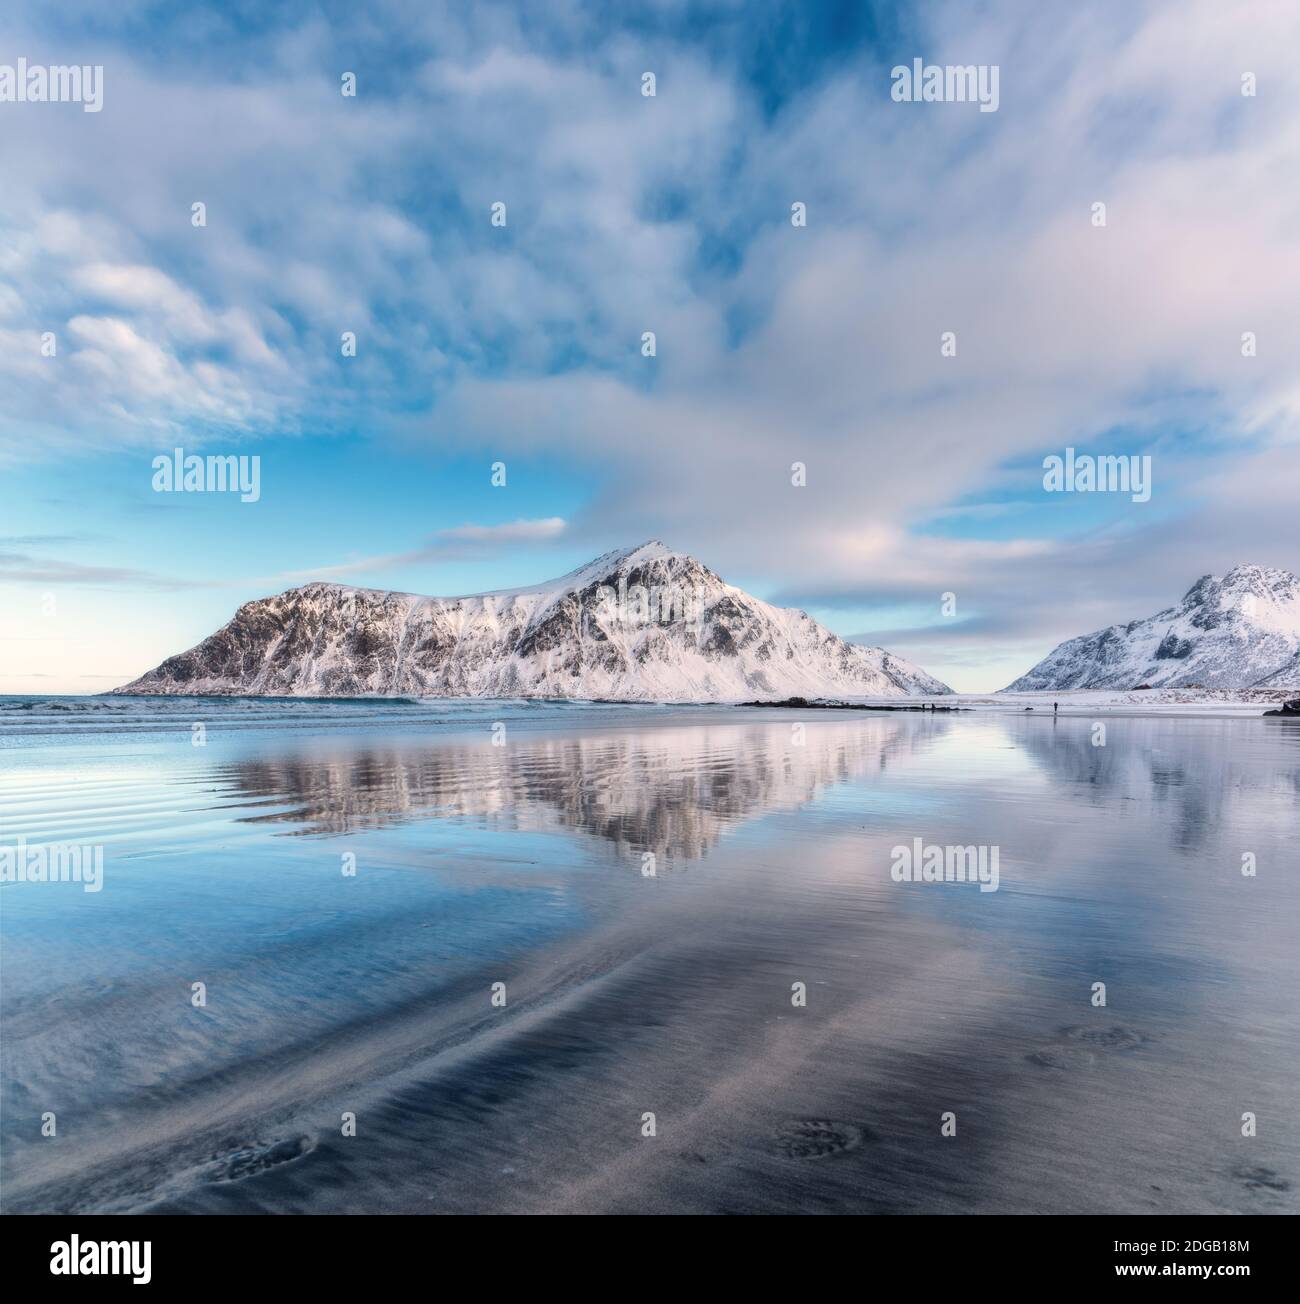 Snowy mountains and blue sky with clouds reflected in water Stock Photo